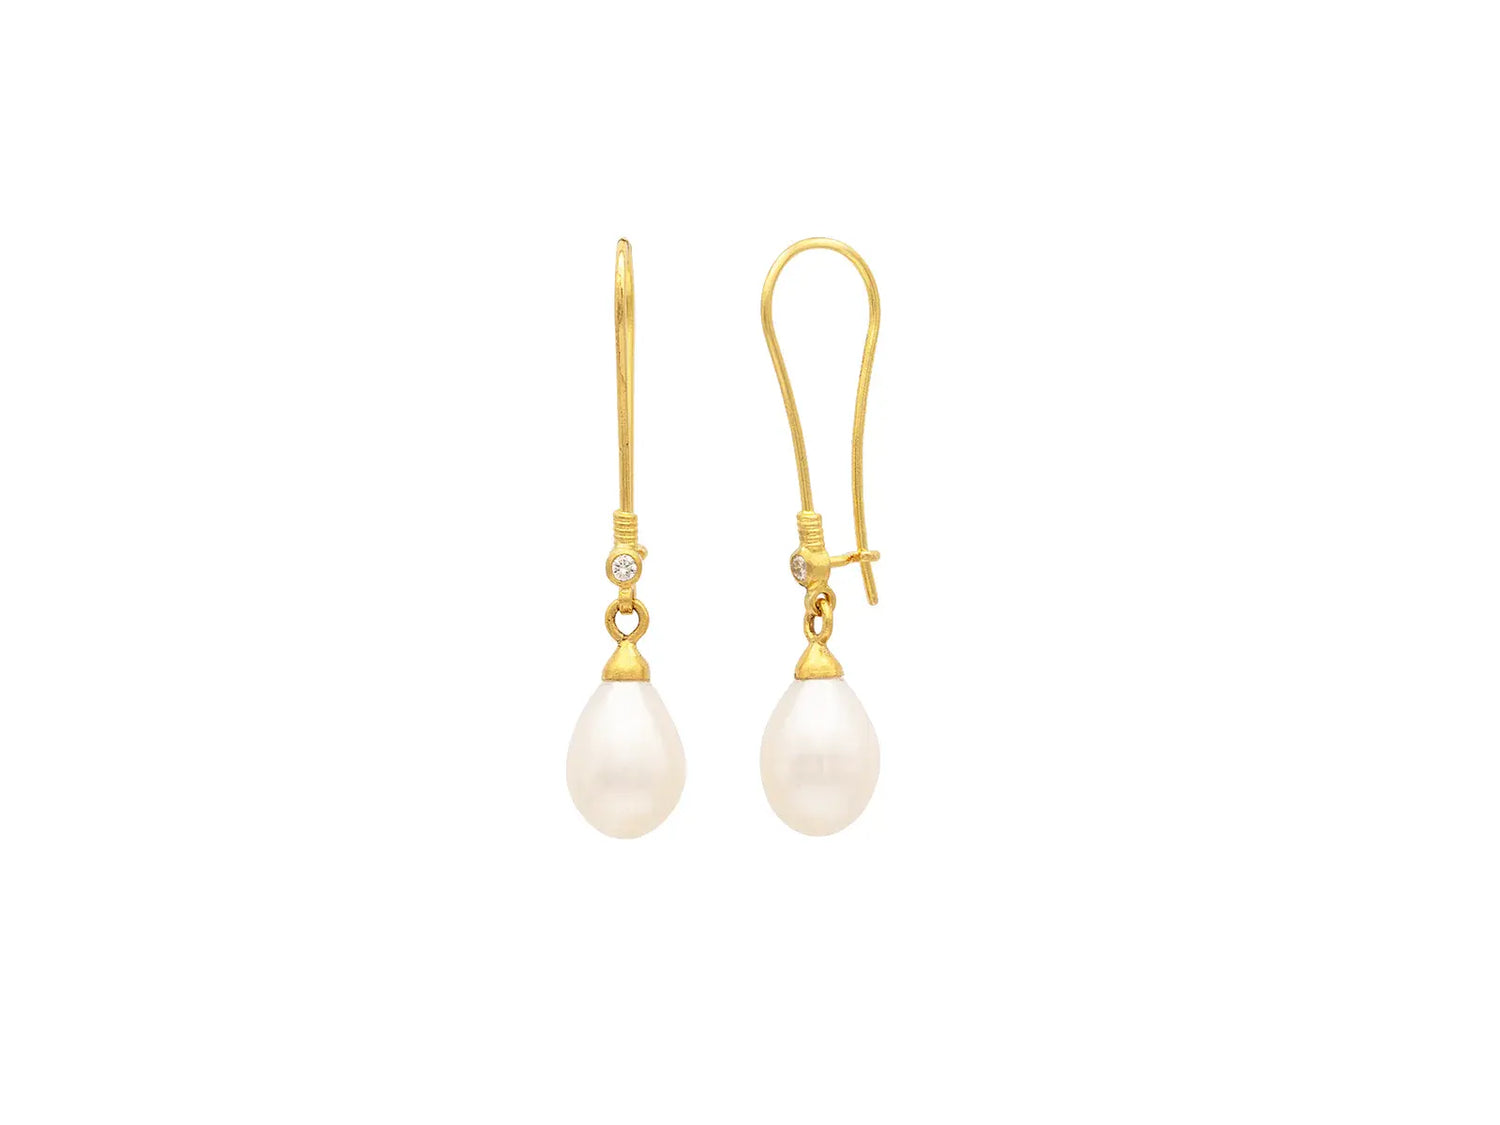 GURHAN Oyster Gold Single Drop Earrings, 13x9mm on Wire Hook, with Pearl and Diamond GURHAN Oyster Gold Single Drop Earrings, 13x9mm on Wire Hook, with Pearl and Diamond Gurhan Gurhan  Squash Blossom Vail